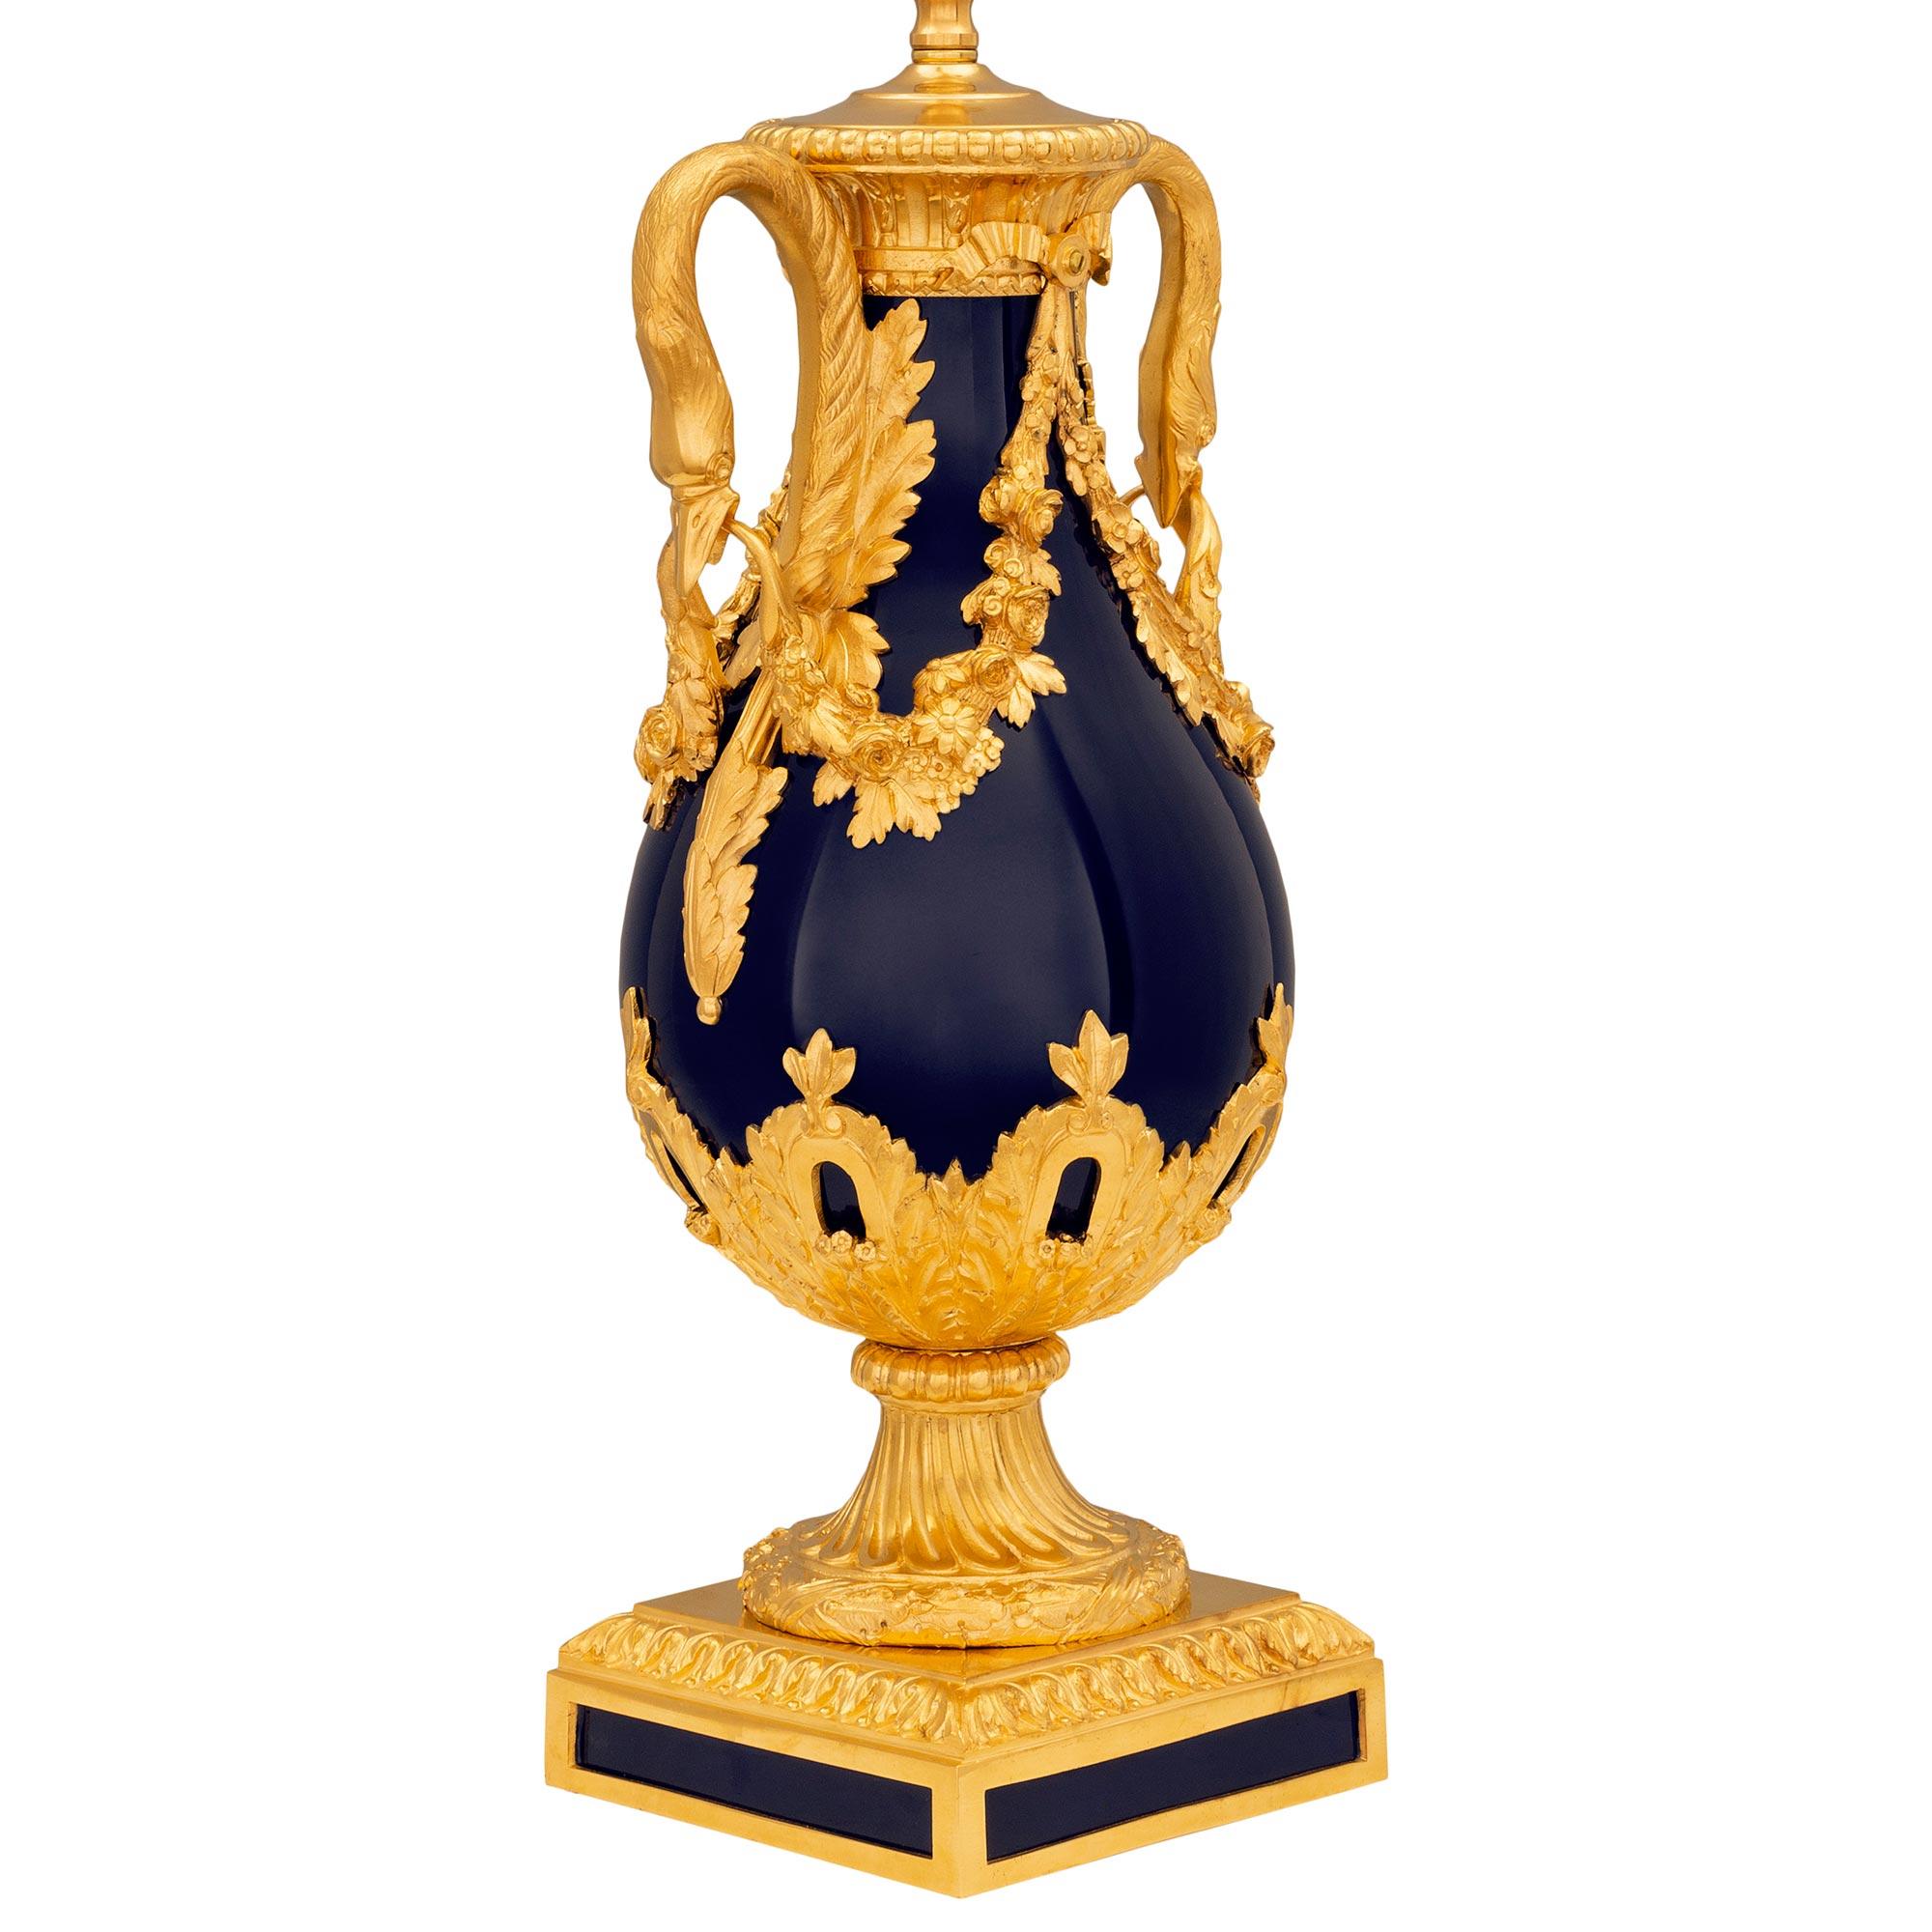 A striking and very high quality French 19th century Louis XVI st. cobalt blue Sèvres porcelain and ormolu lamp. The lamp is raised by a square ormolu base with elegant and unique fitted porcelain plaques at each side with a wrap around Coeur de Rai